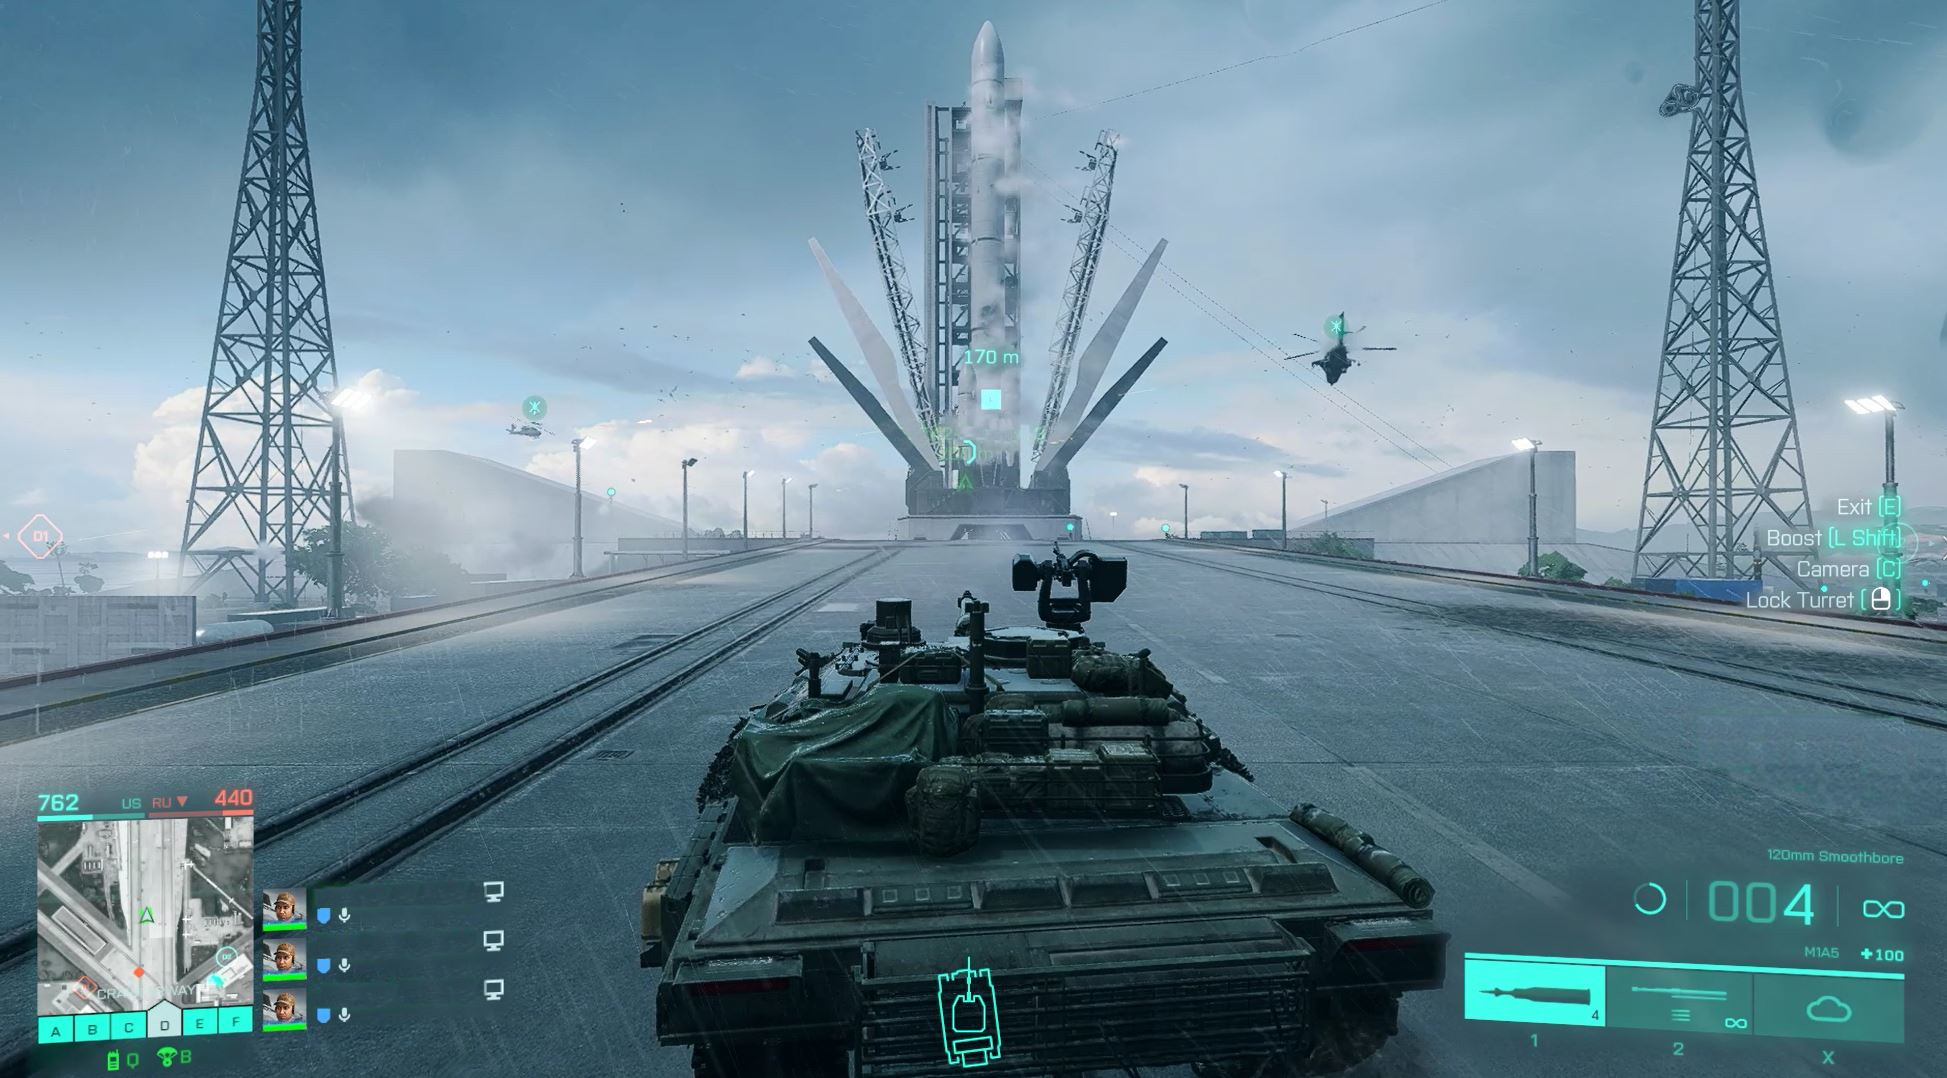 Battlefield 2042 rocket: The rocket on Orbital begins its launch sequence but is attacked by tanks and helicopters.